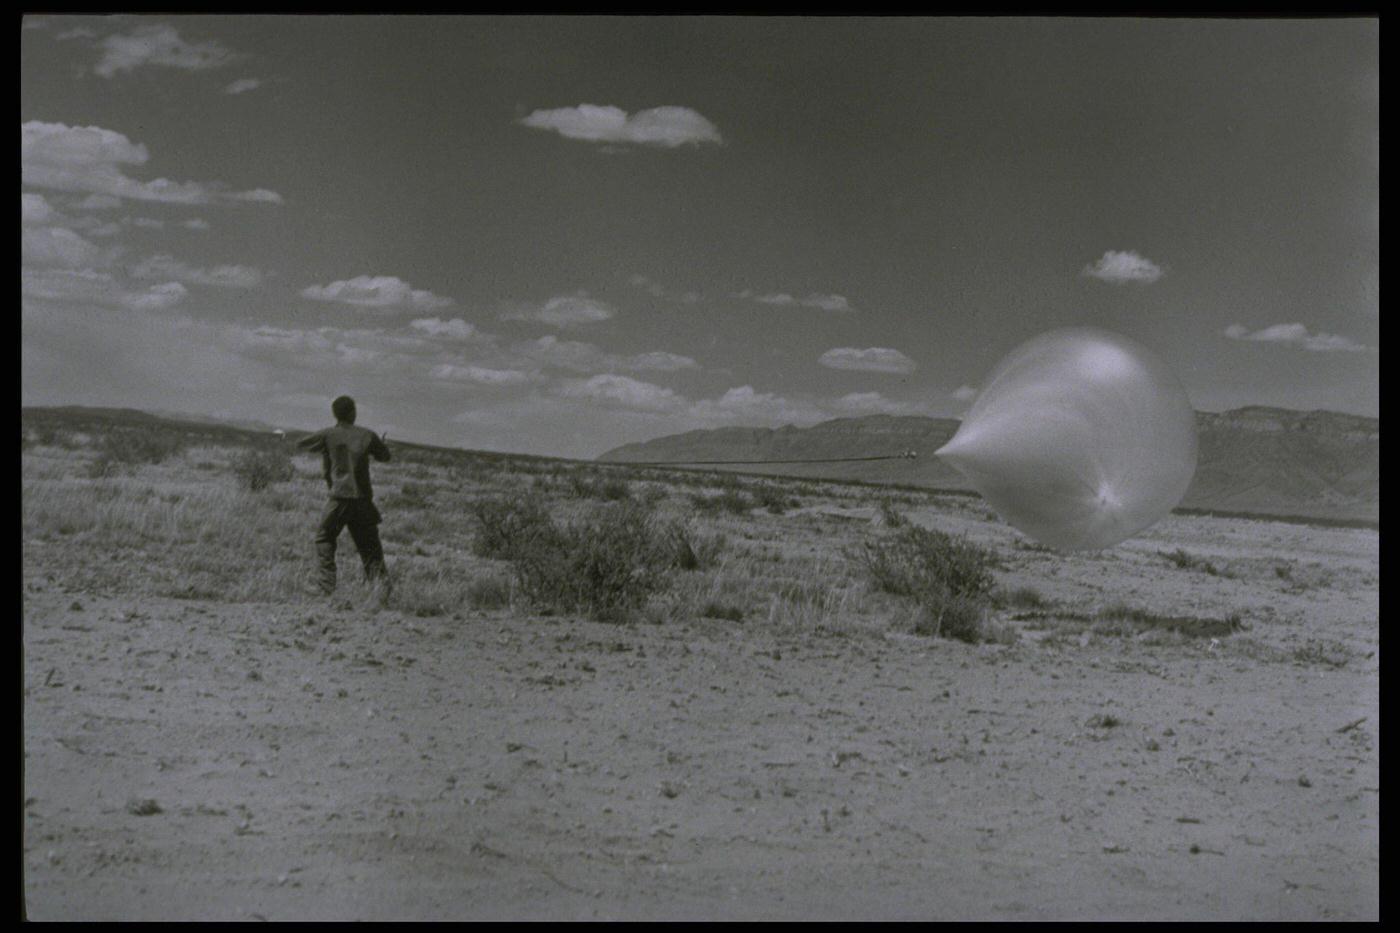 Man Holding Research Balloon in Desert, New Mexico